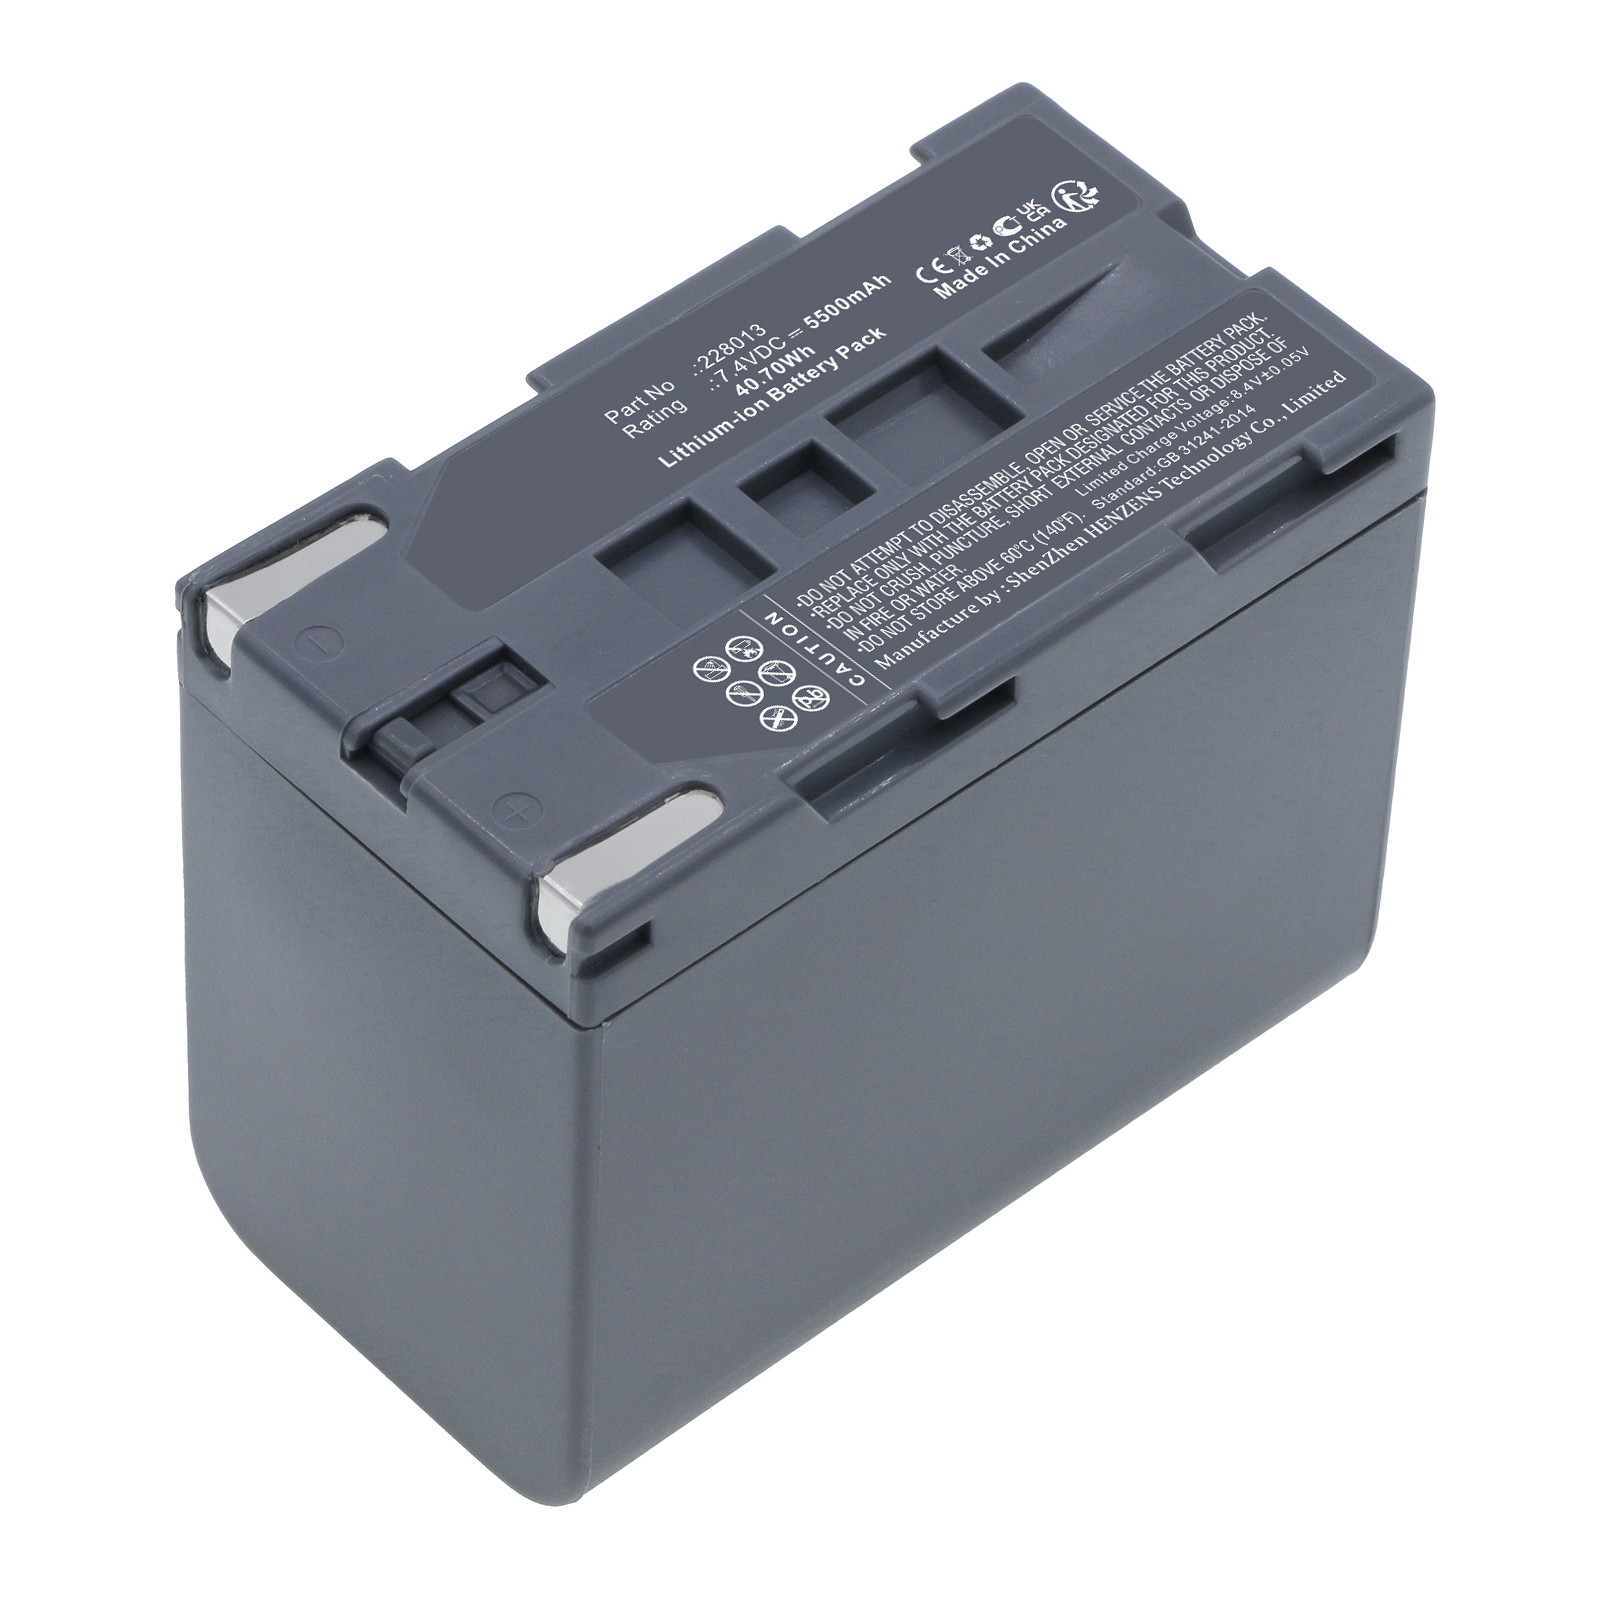 Synergy Digital Equipment Battery, Compatible with Softing IT 228013 Equipment Battery (Li-ion, 7.4V, 5500mAh)